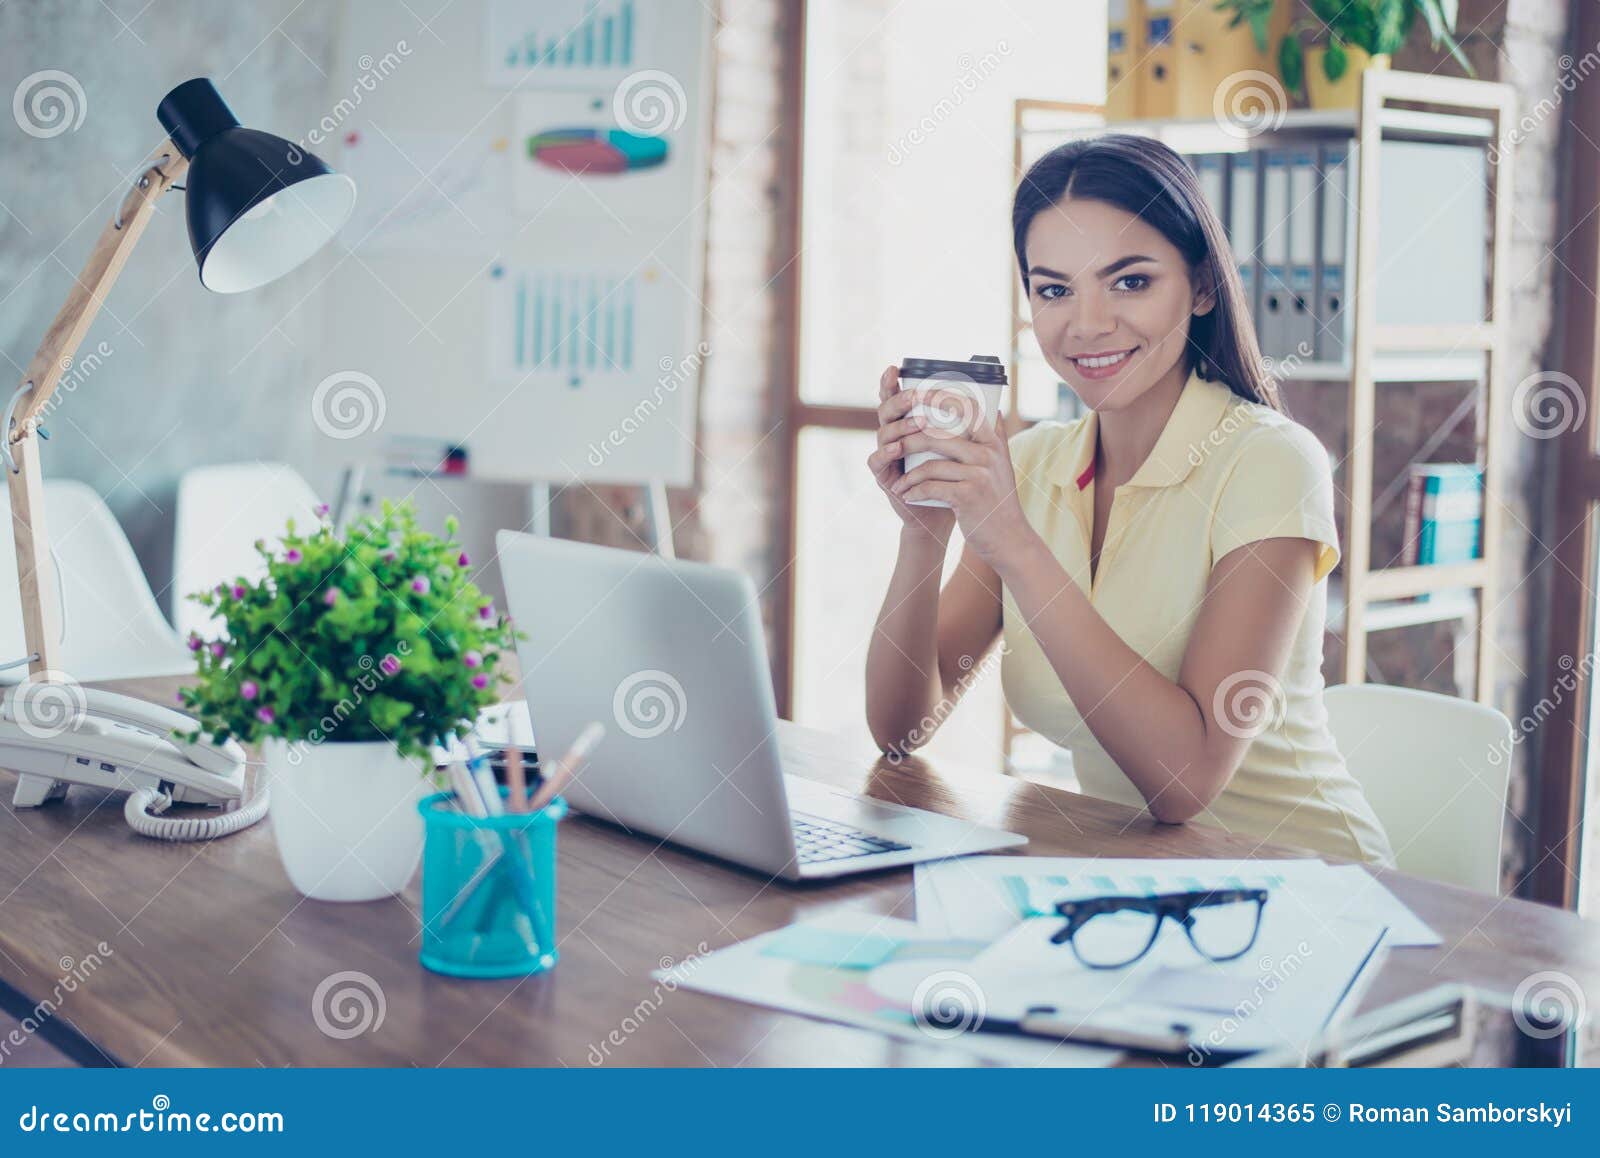 smiling young mulatto girl is drinking coffee at the break in of